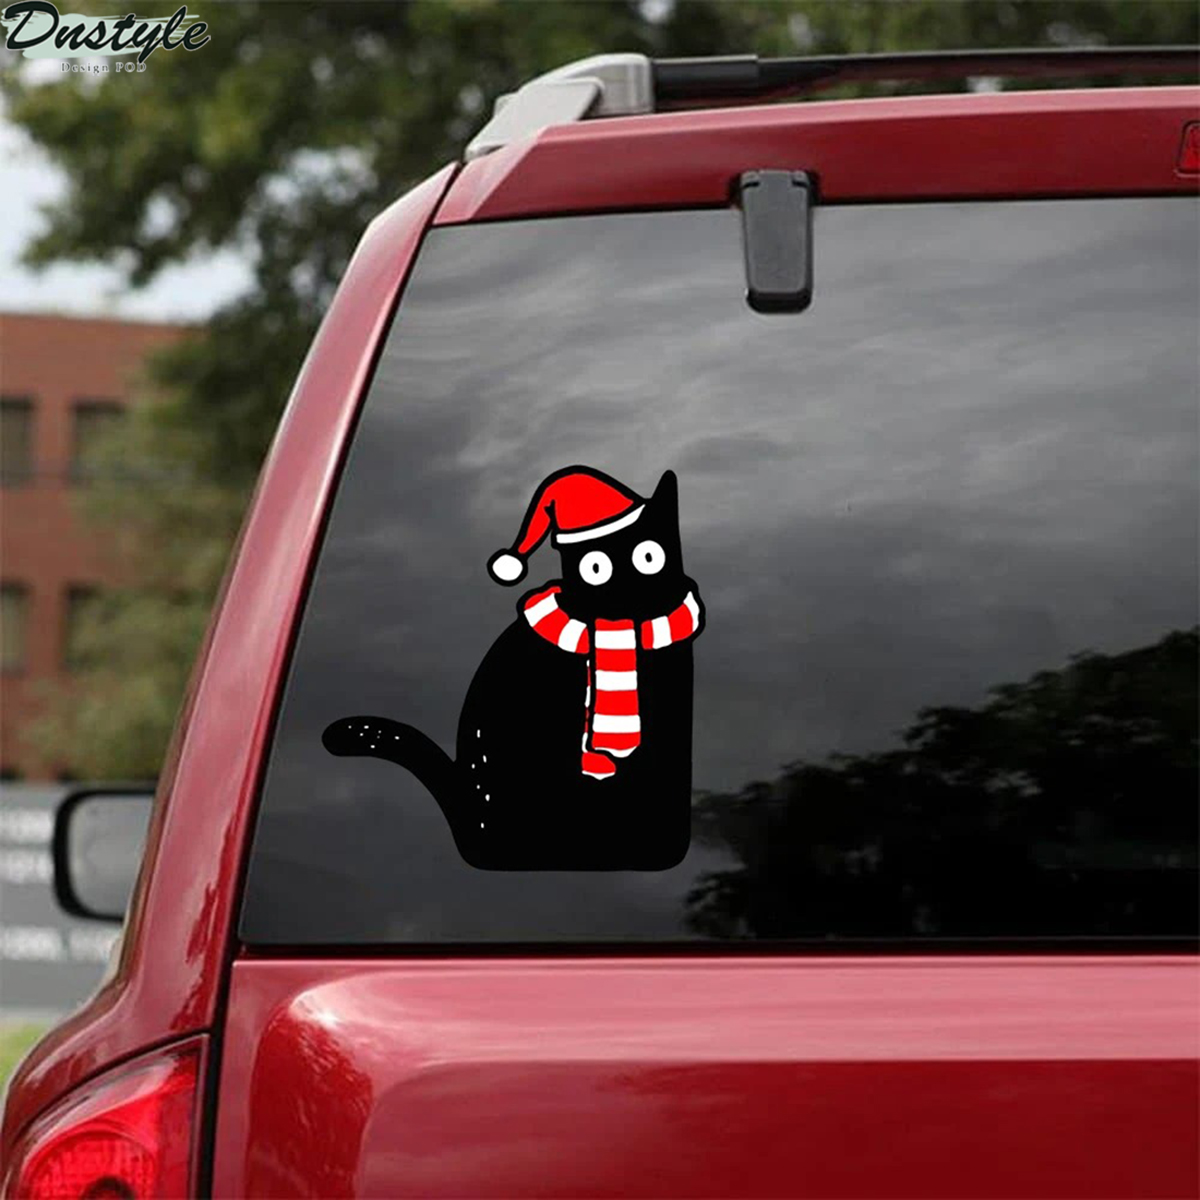 Funny black cats merry christmas car decal sticker 2